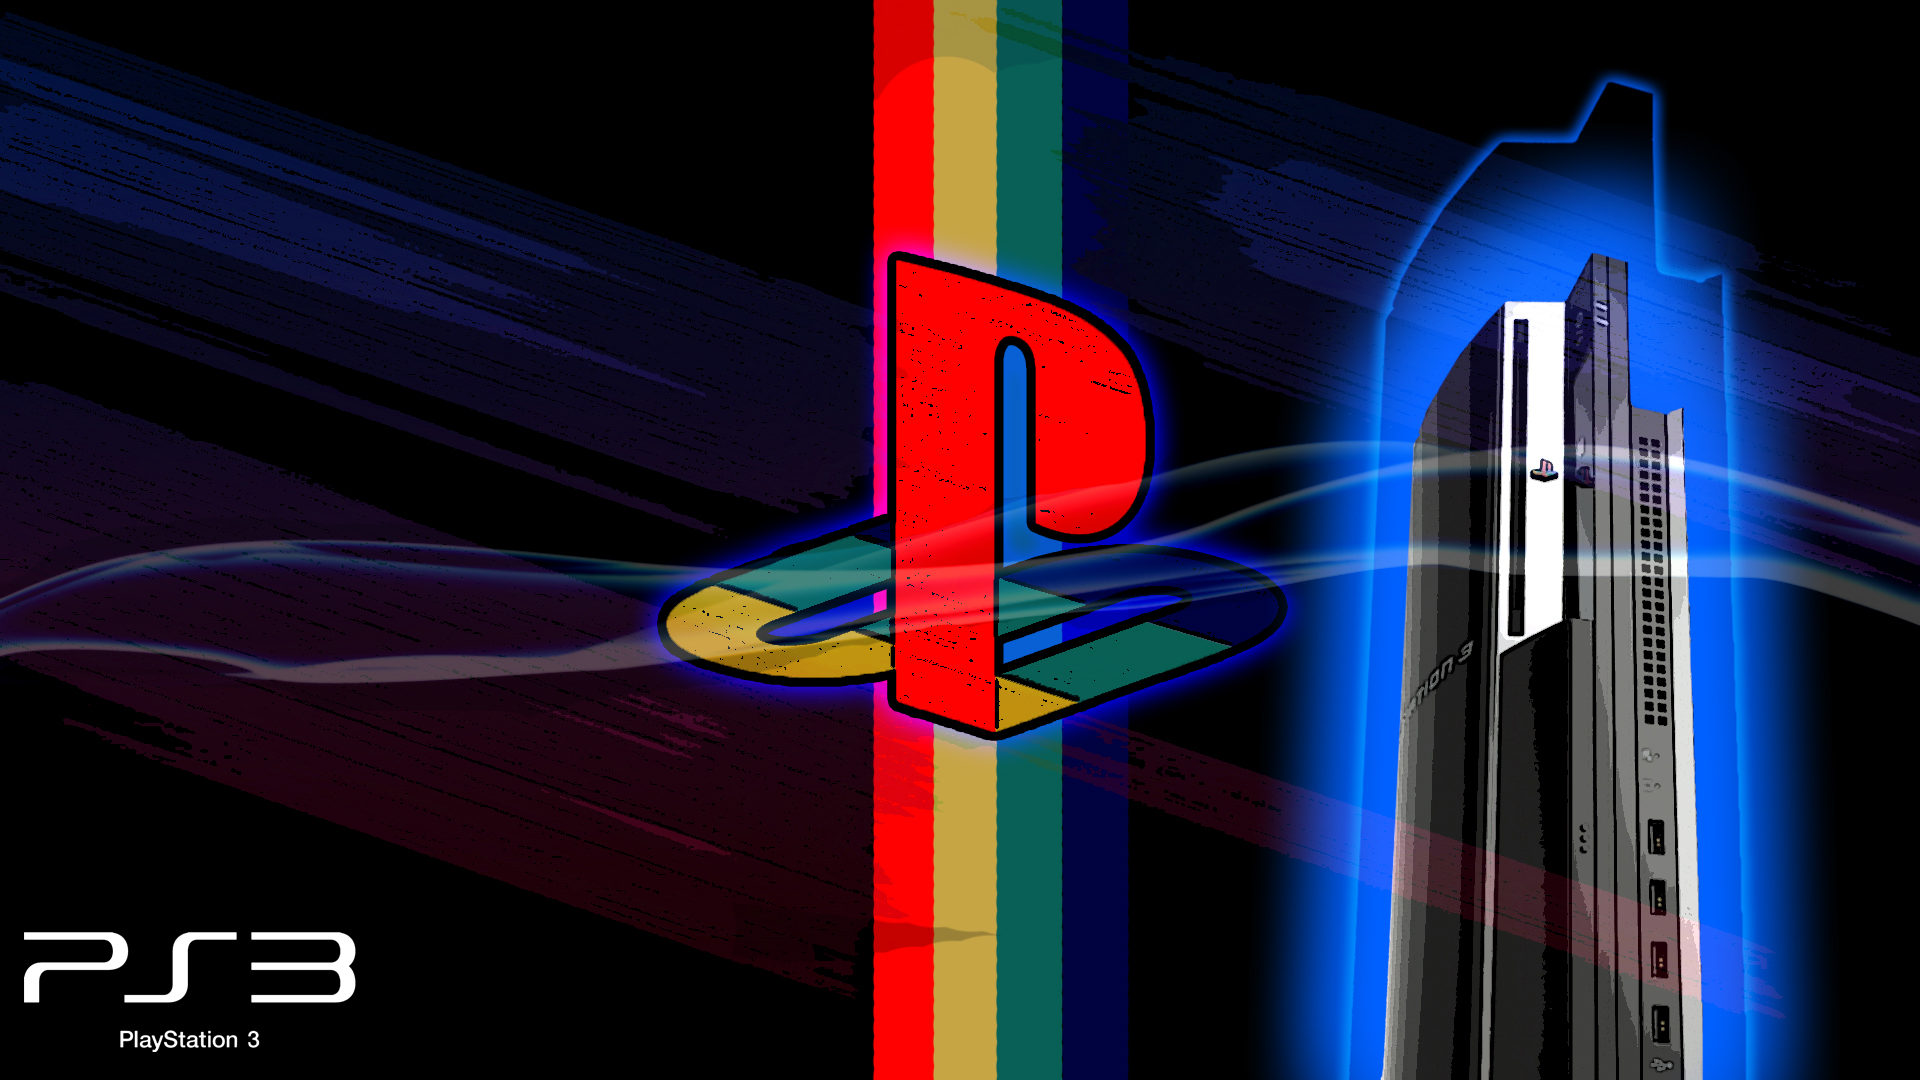 Free Download Ps Logo And Ps3 Wallpaper 1920x1080 For Your